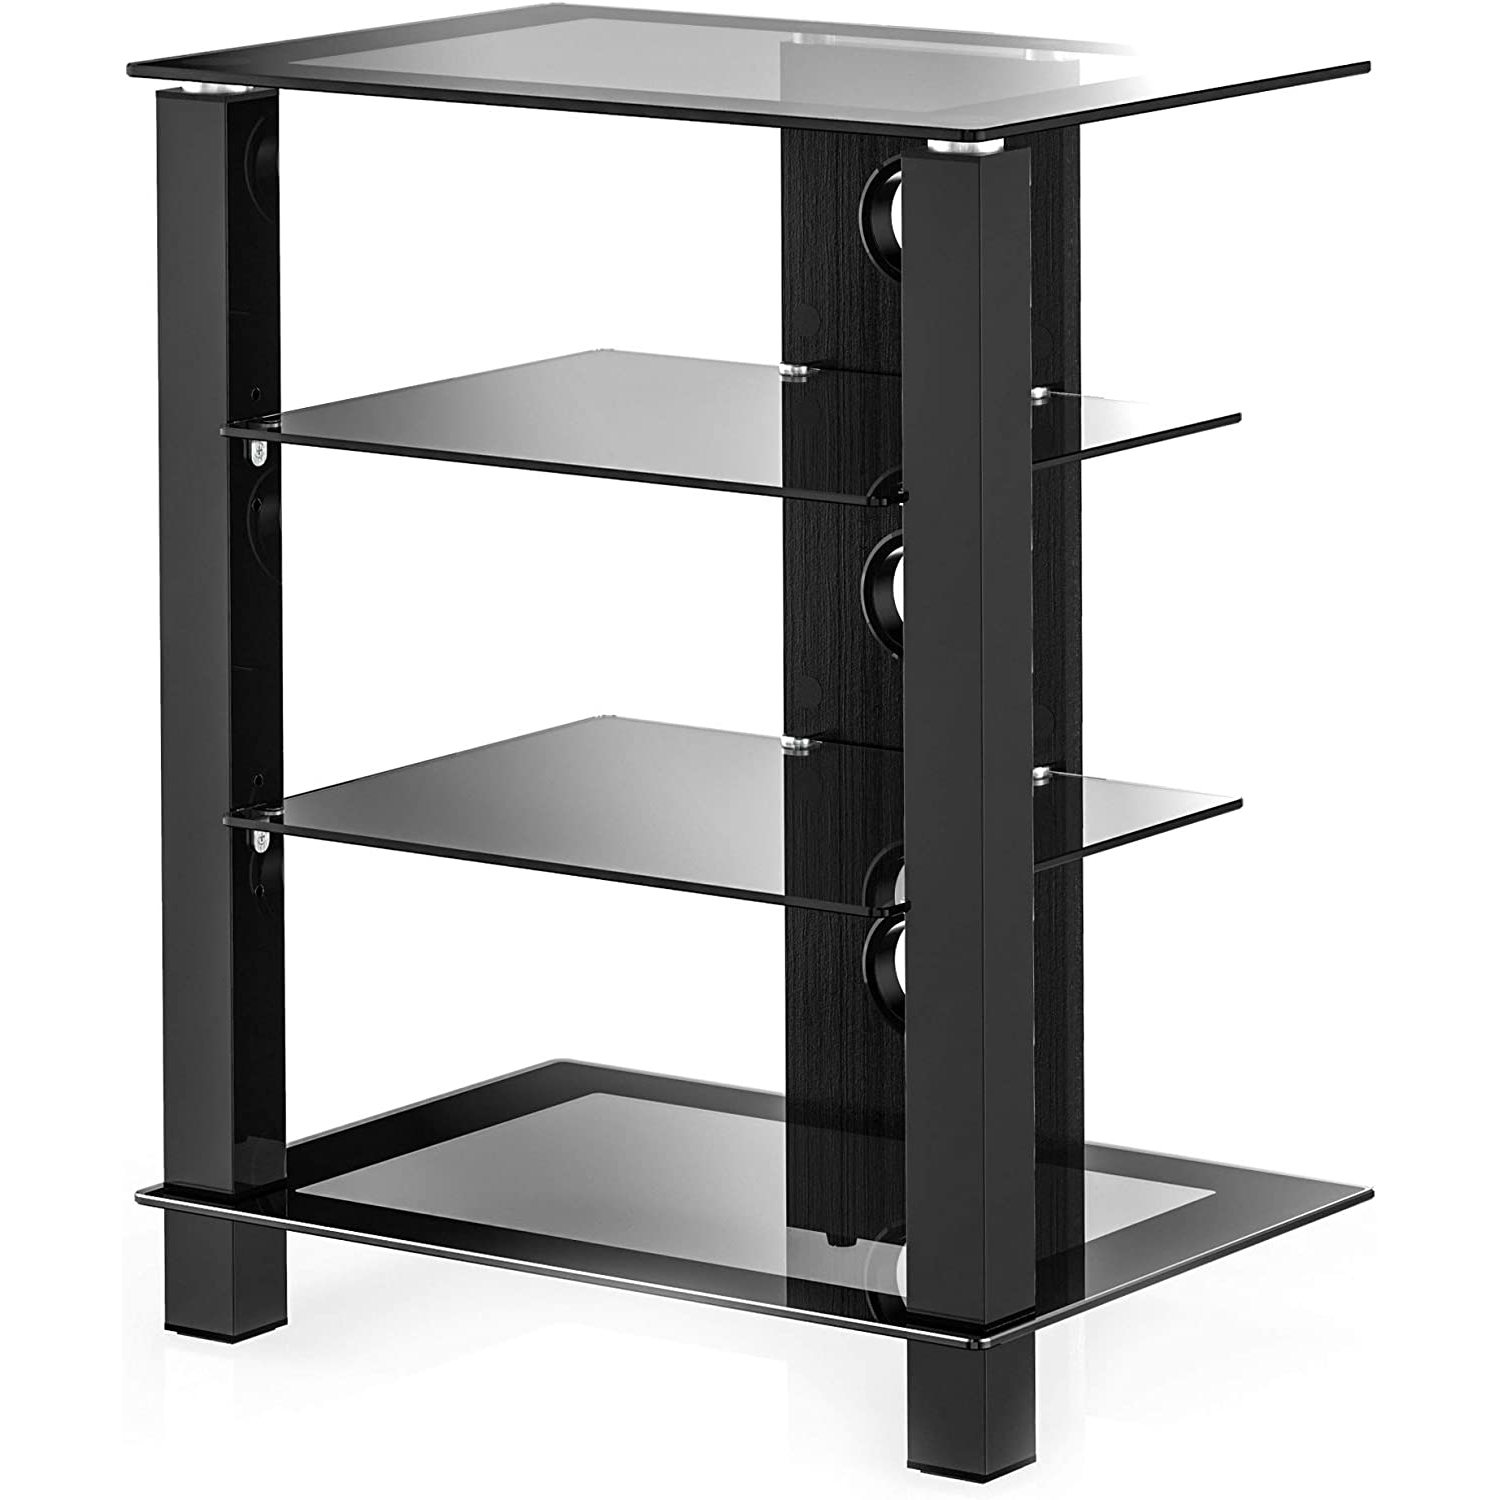 Bilot 4-Tier AV Media Cabinet Stand Component Cabinet, Gaming TV Stand and Stereo Rack Audio Tower with Height Adjustable Tempered Glass Shelves, AS406003GB - image 1 of 8